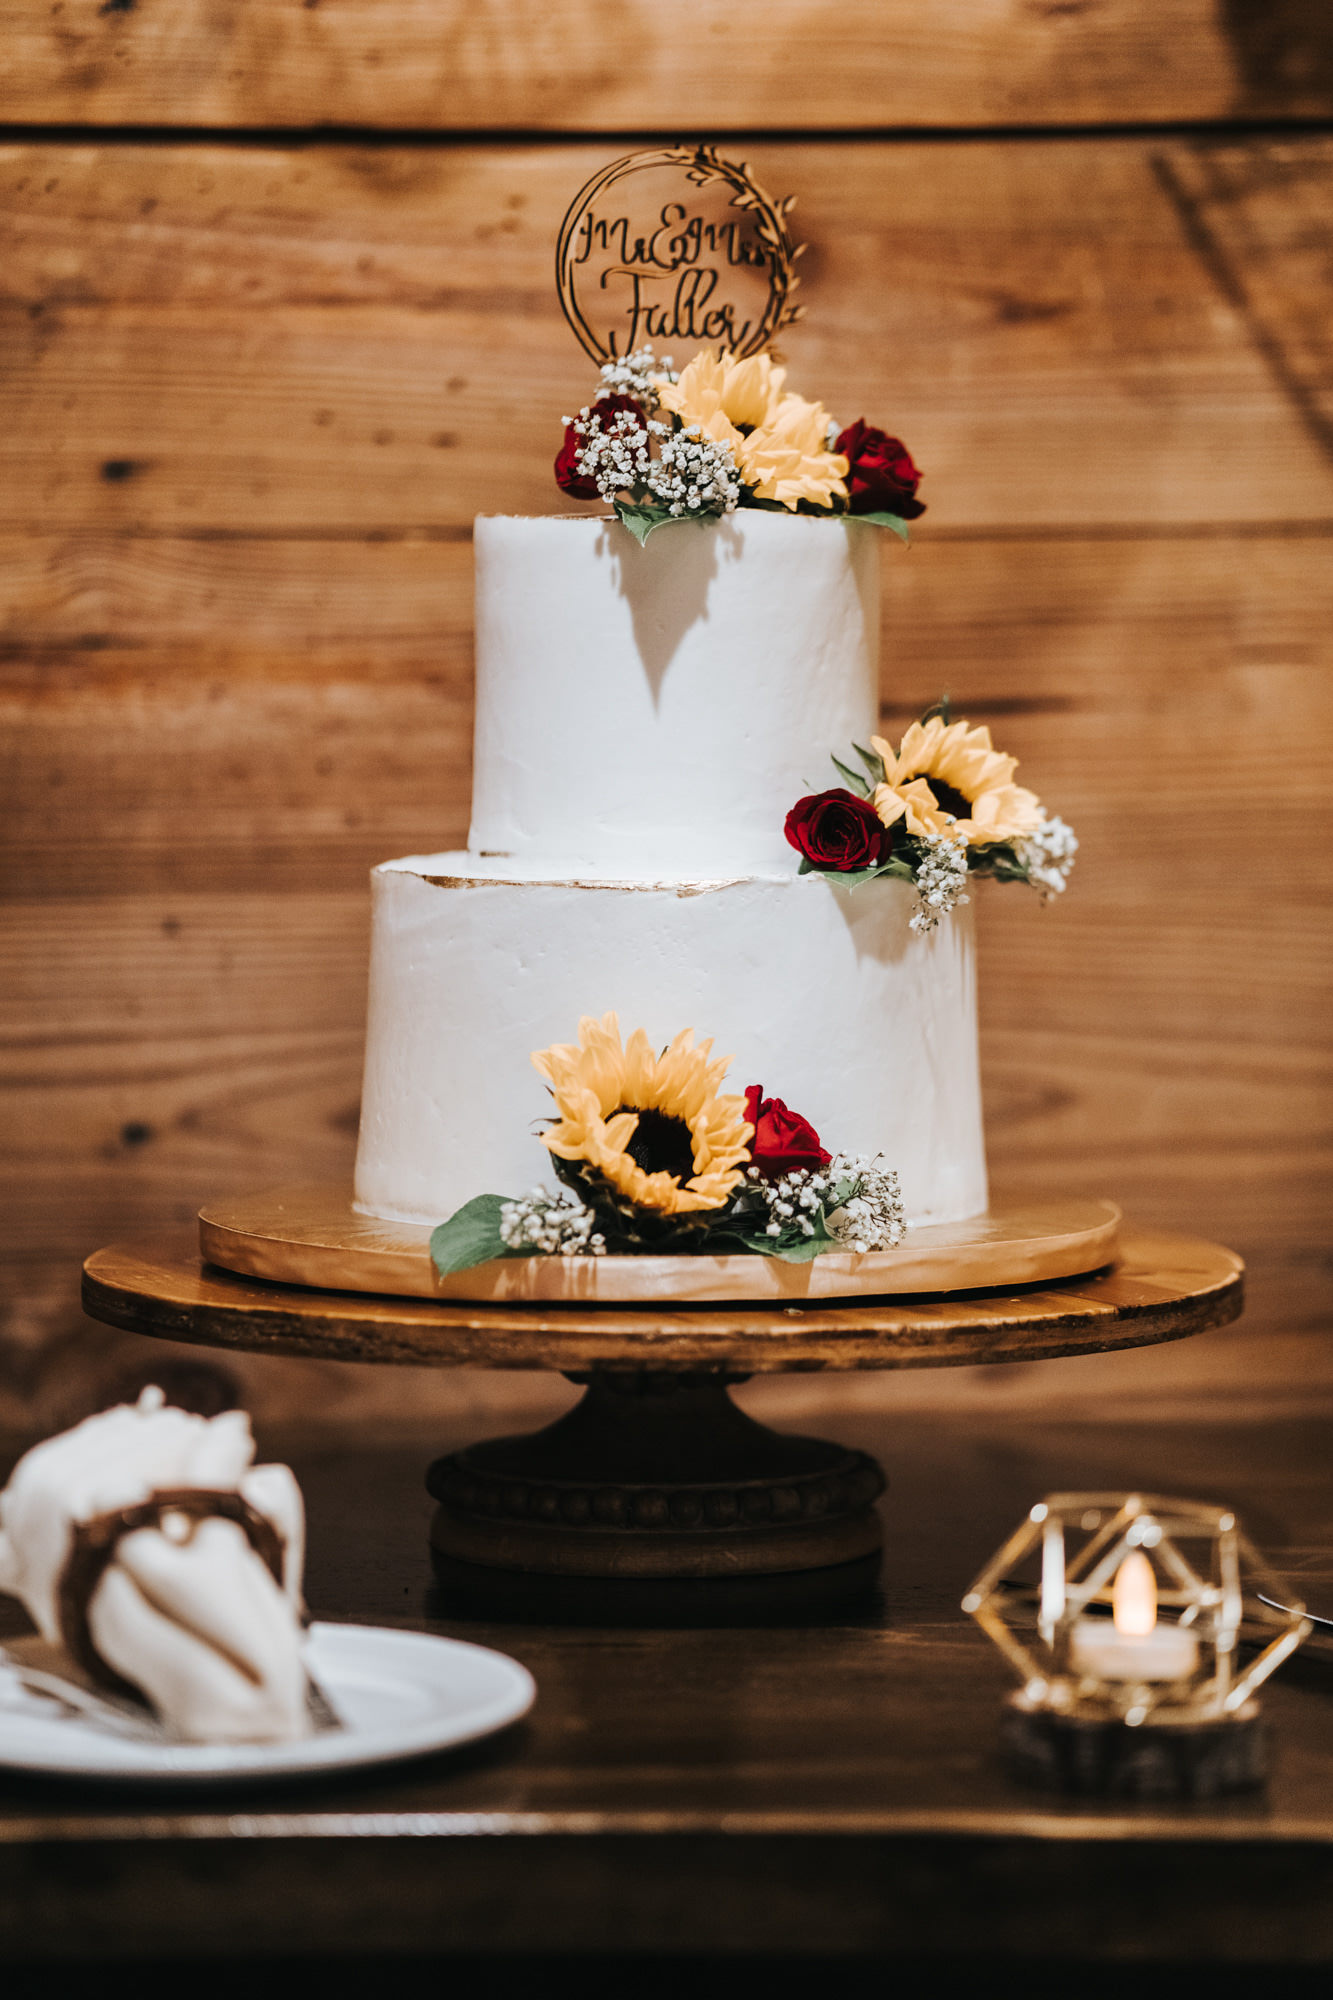 Two Tier Simple Smooth Buttercream Wedding Cake with Yellow Sunflowers and Red Roses and Baby's Breath topped with Die Cut Wood Name Cake Topper